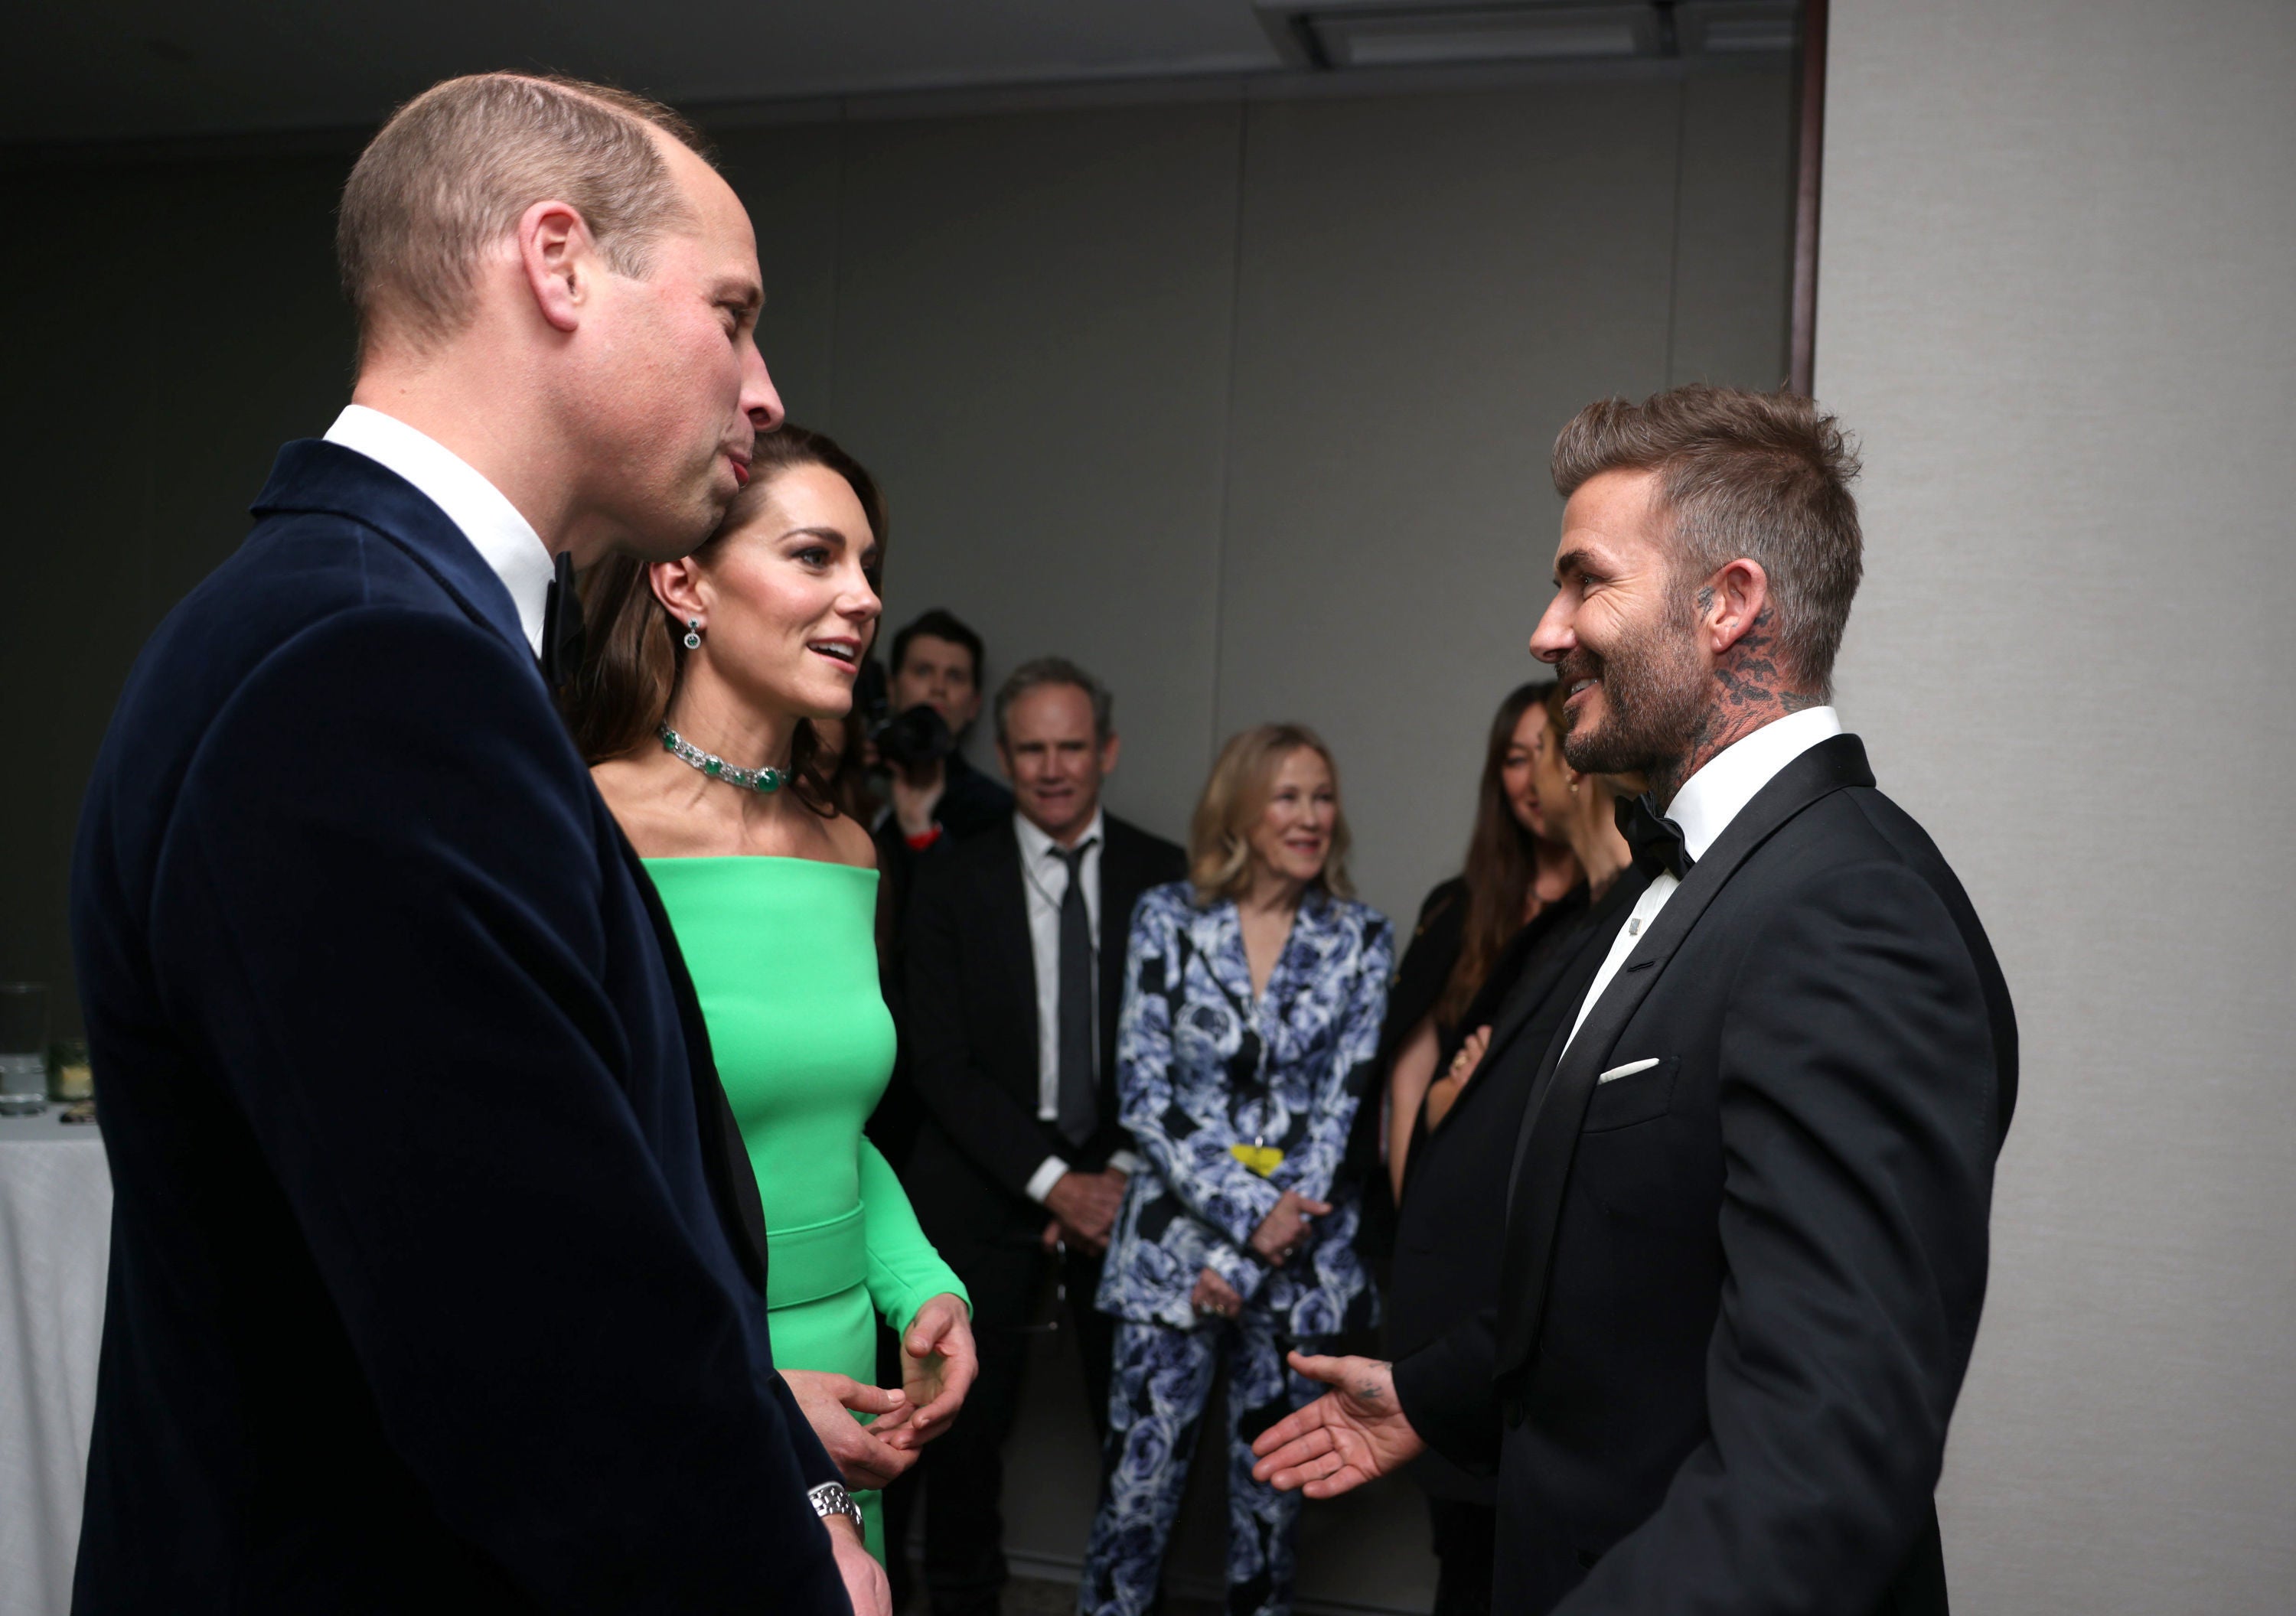 The Prince and Princess of Wales talk to David Beckham at the second annual Earthshot Prize Awards Ceremony